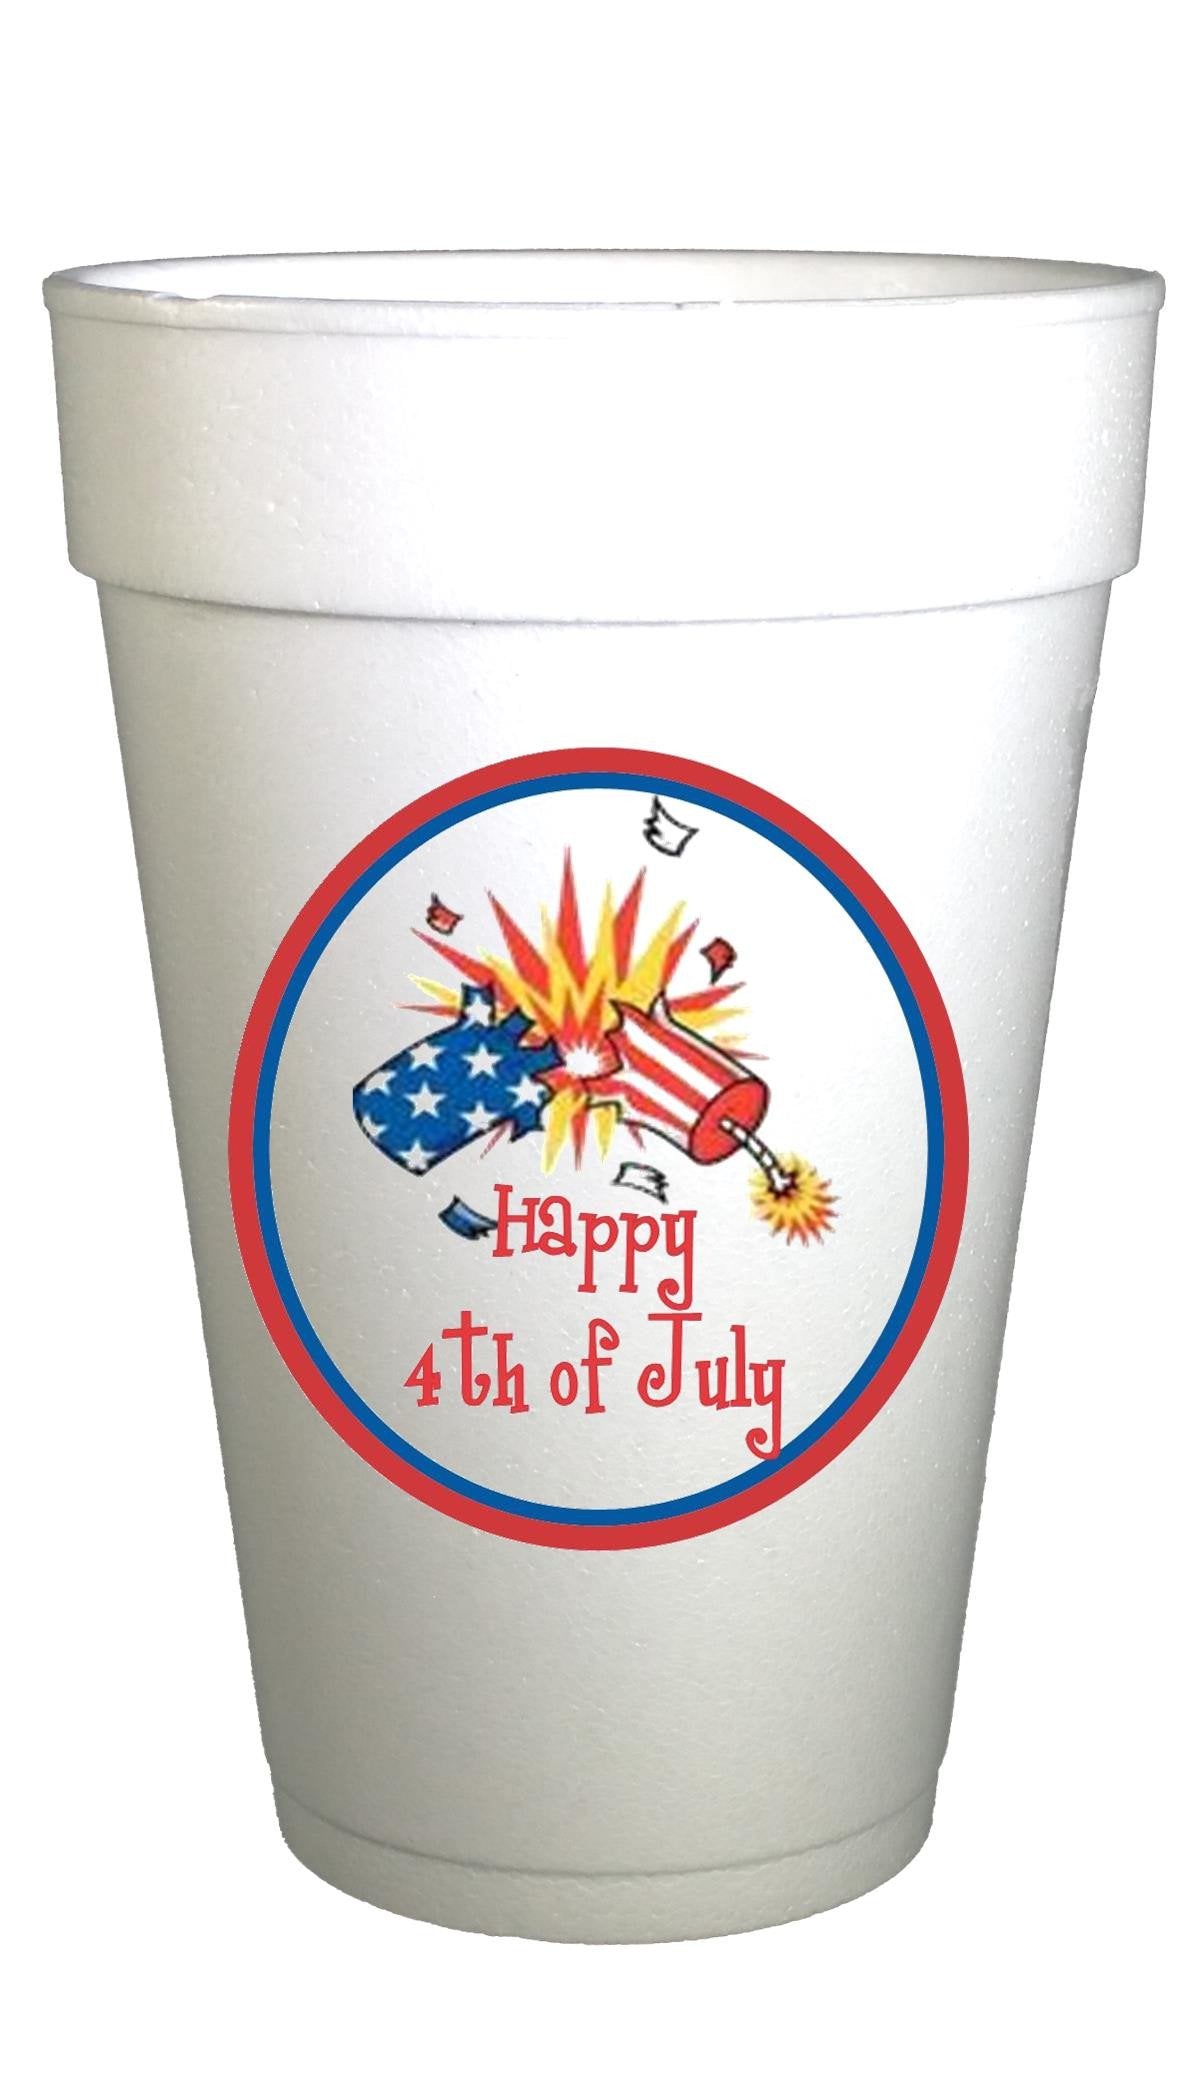 styrofoam cups with firecracker 4th of july image on cups